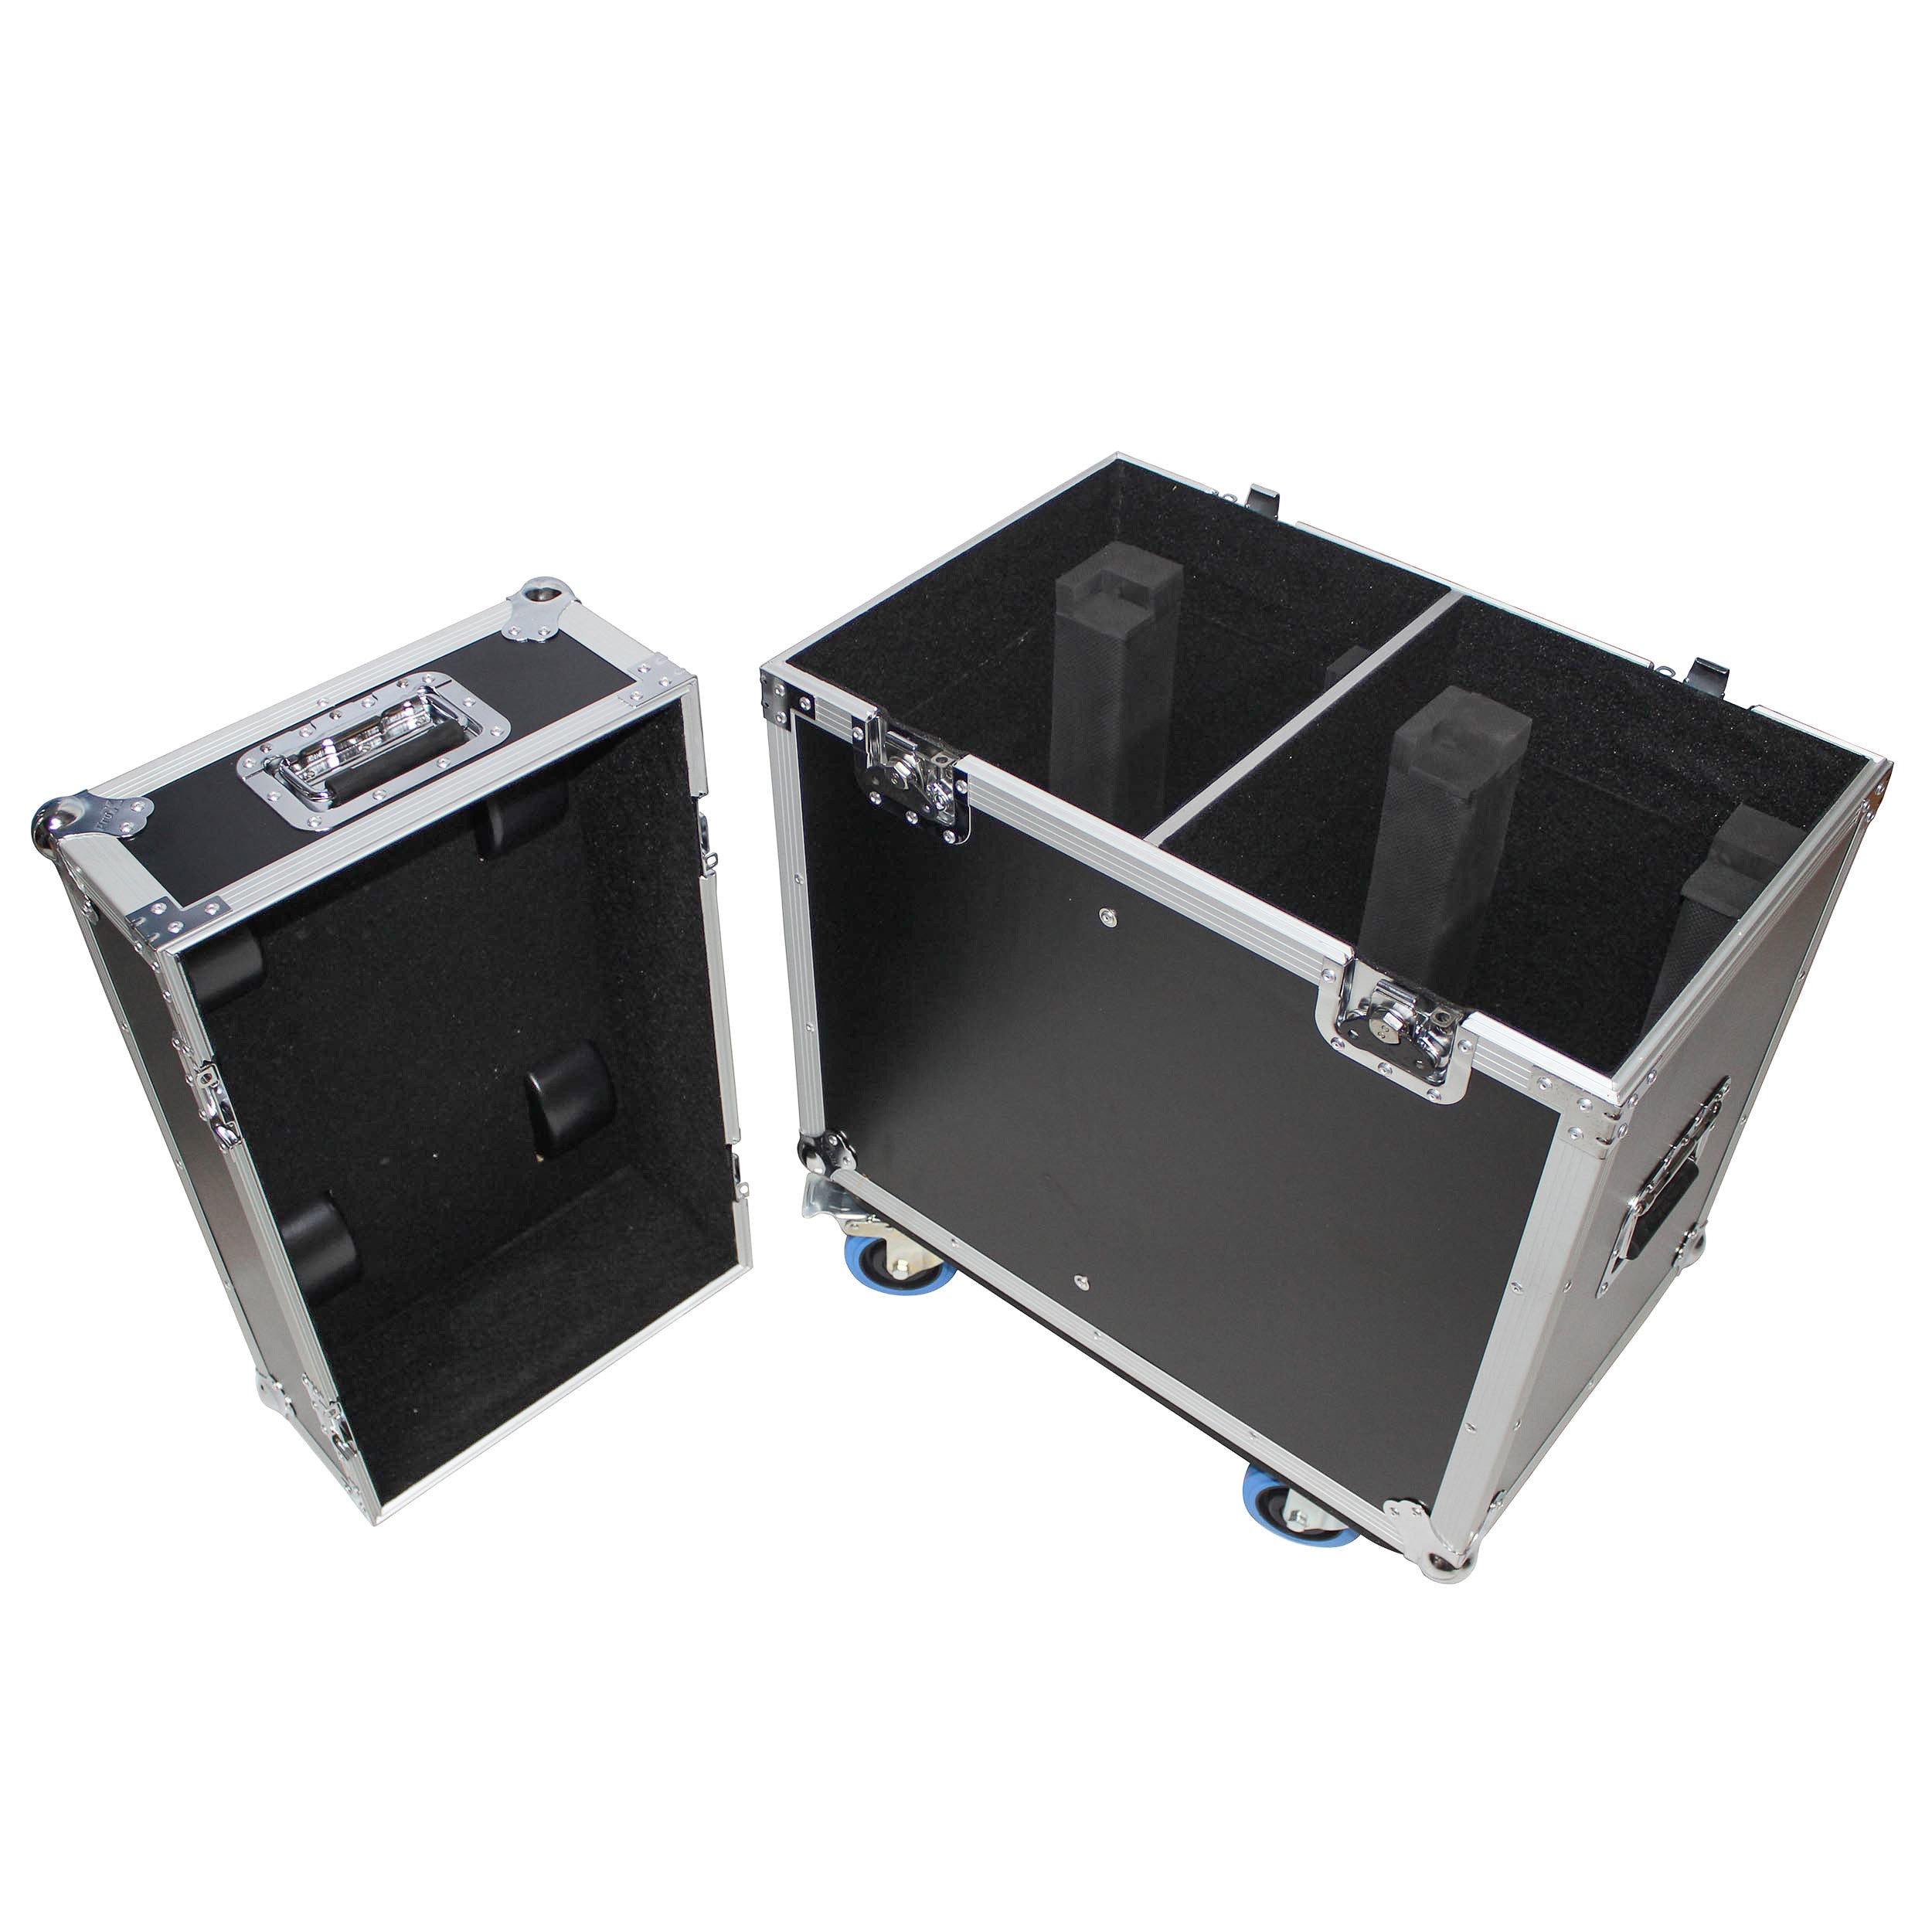 Pro X 300 Style Moving Head Transport Case for 2 Units XS-MH300X2W